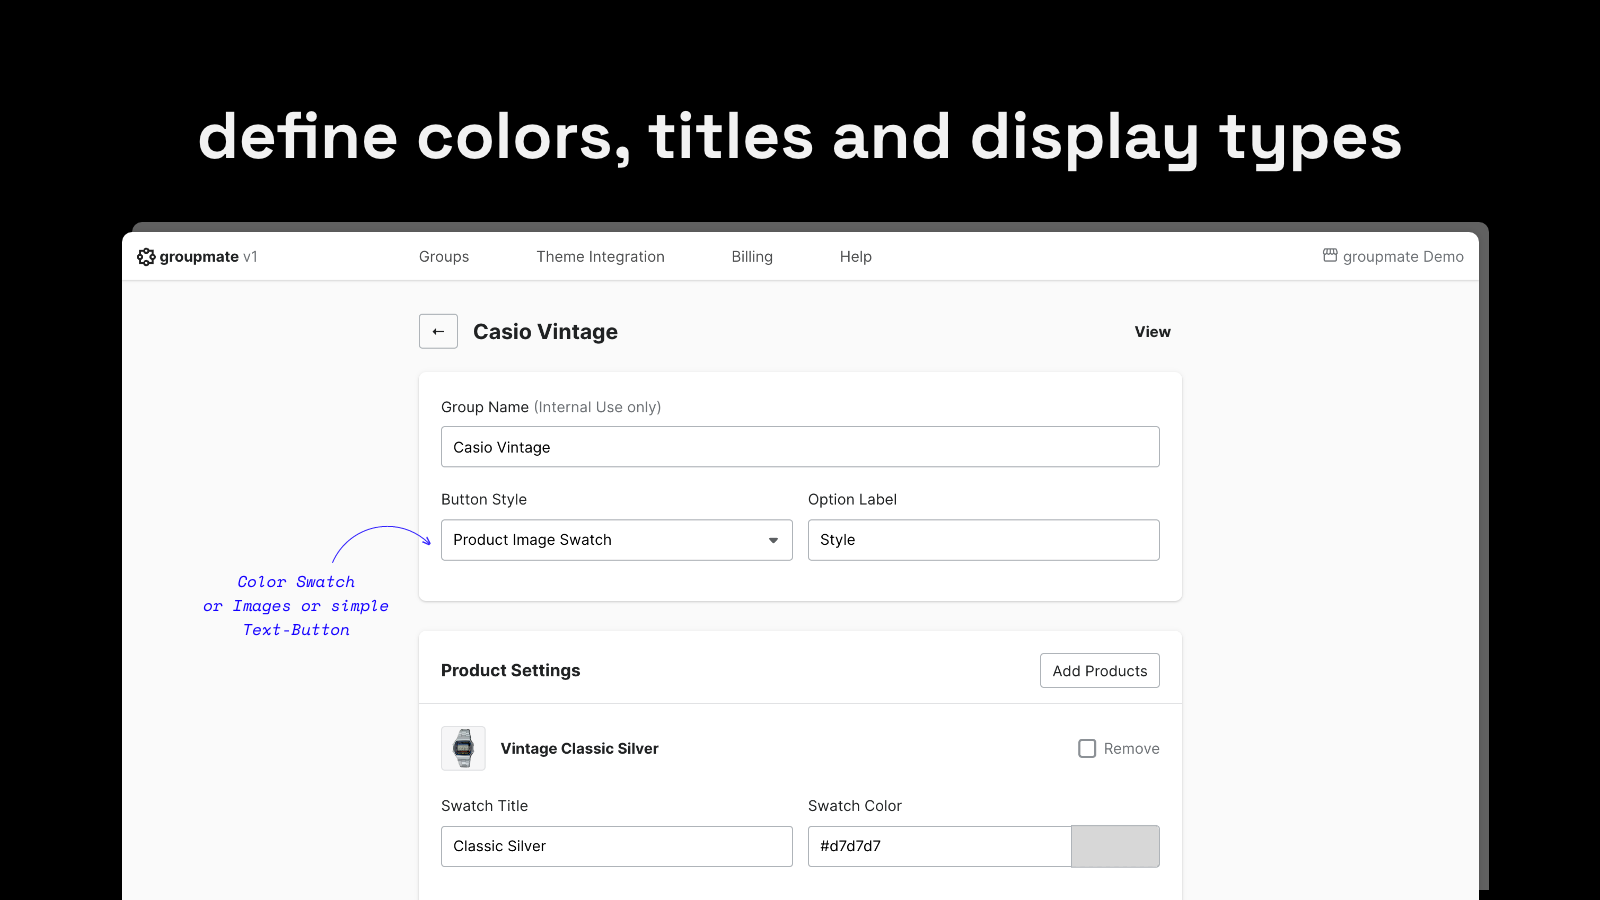 set colors, titles and display types